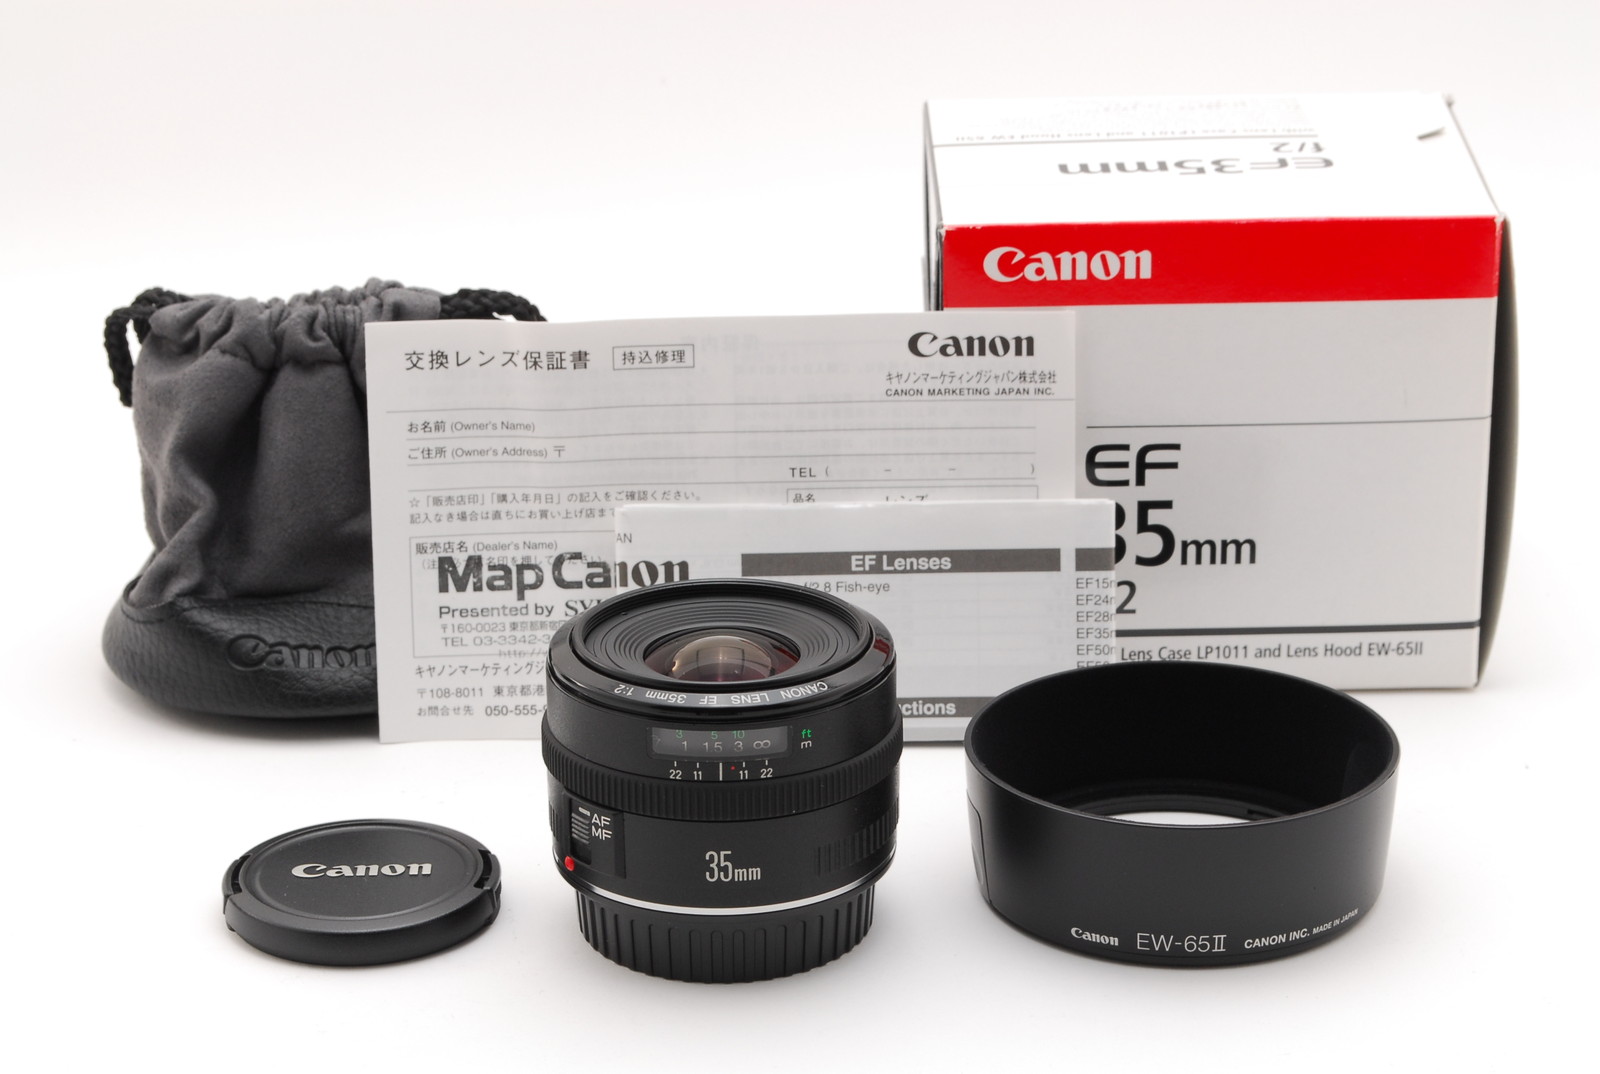 PROMOTION.😊 TOP MINT Canon EF 35mm f/2 EF Lens W/ Box, Manual, Hood and More from Japan